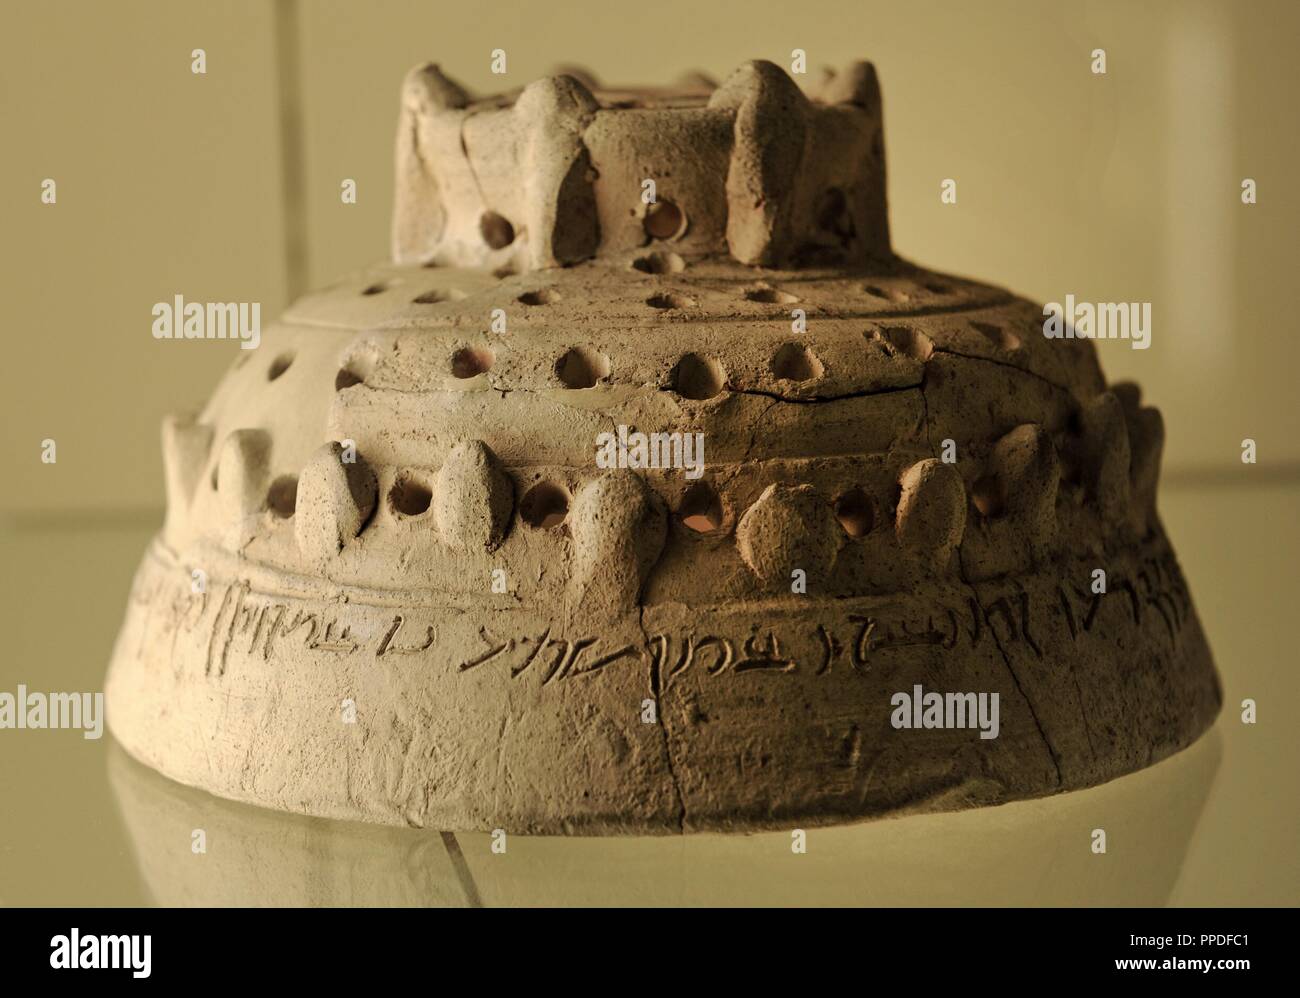 Mesopotamia. Ceramic lid of an incense burner with inscriptions written in Aramaic. Dated between 1st century B.C. and 2nd century B.C. Pergamon Museum. Berlin. Stock Photo